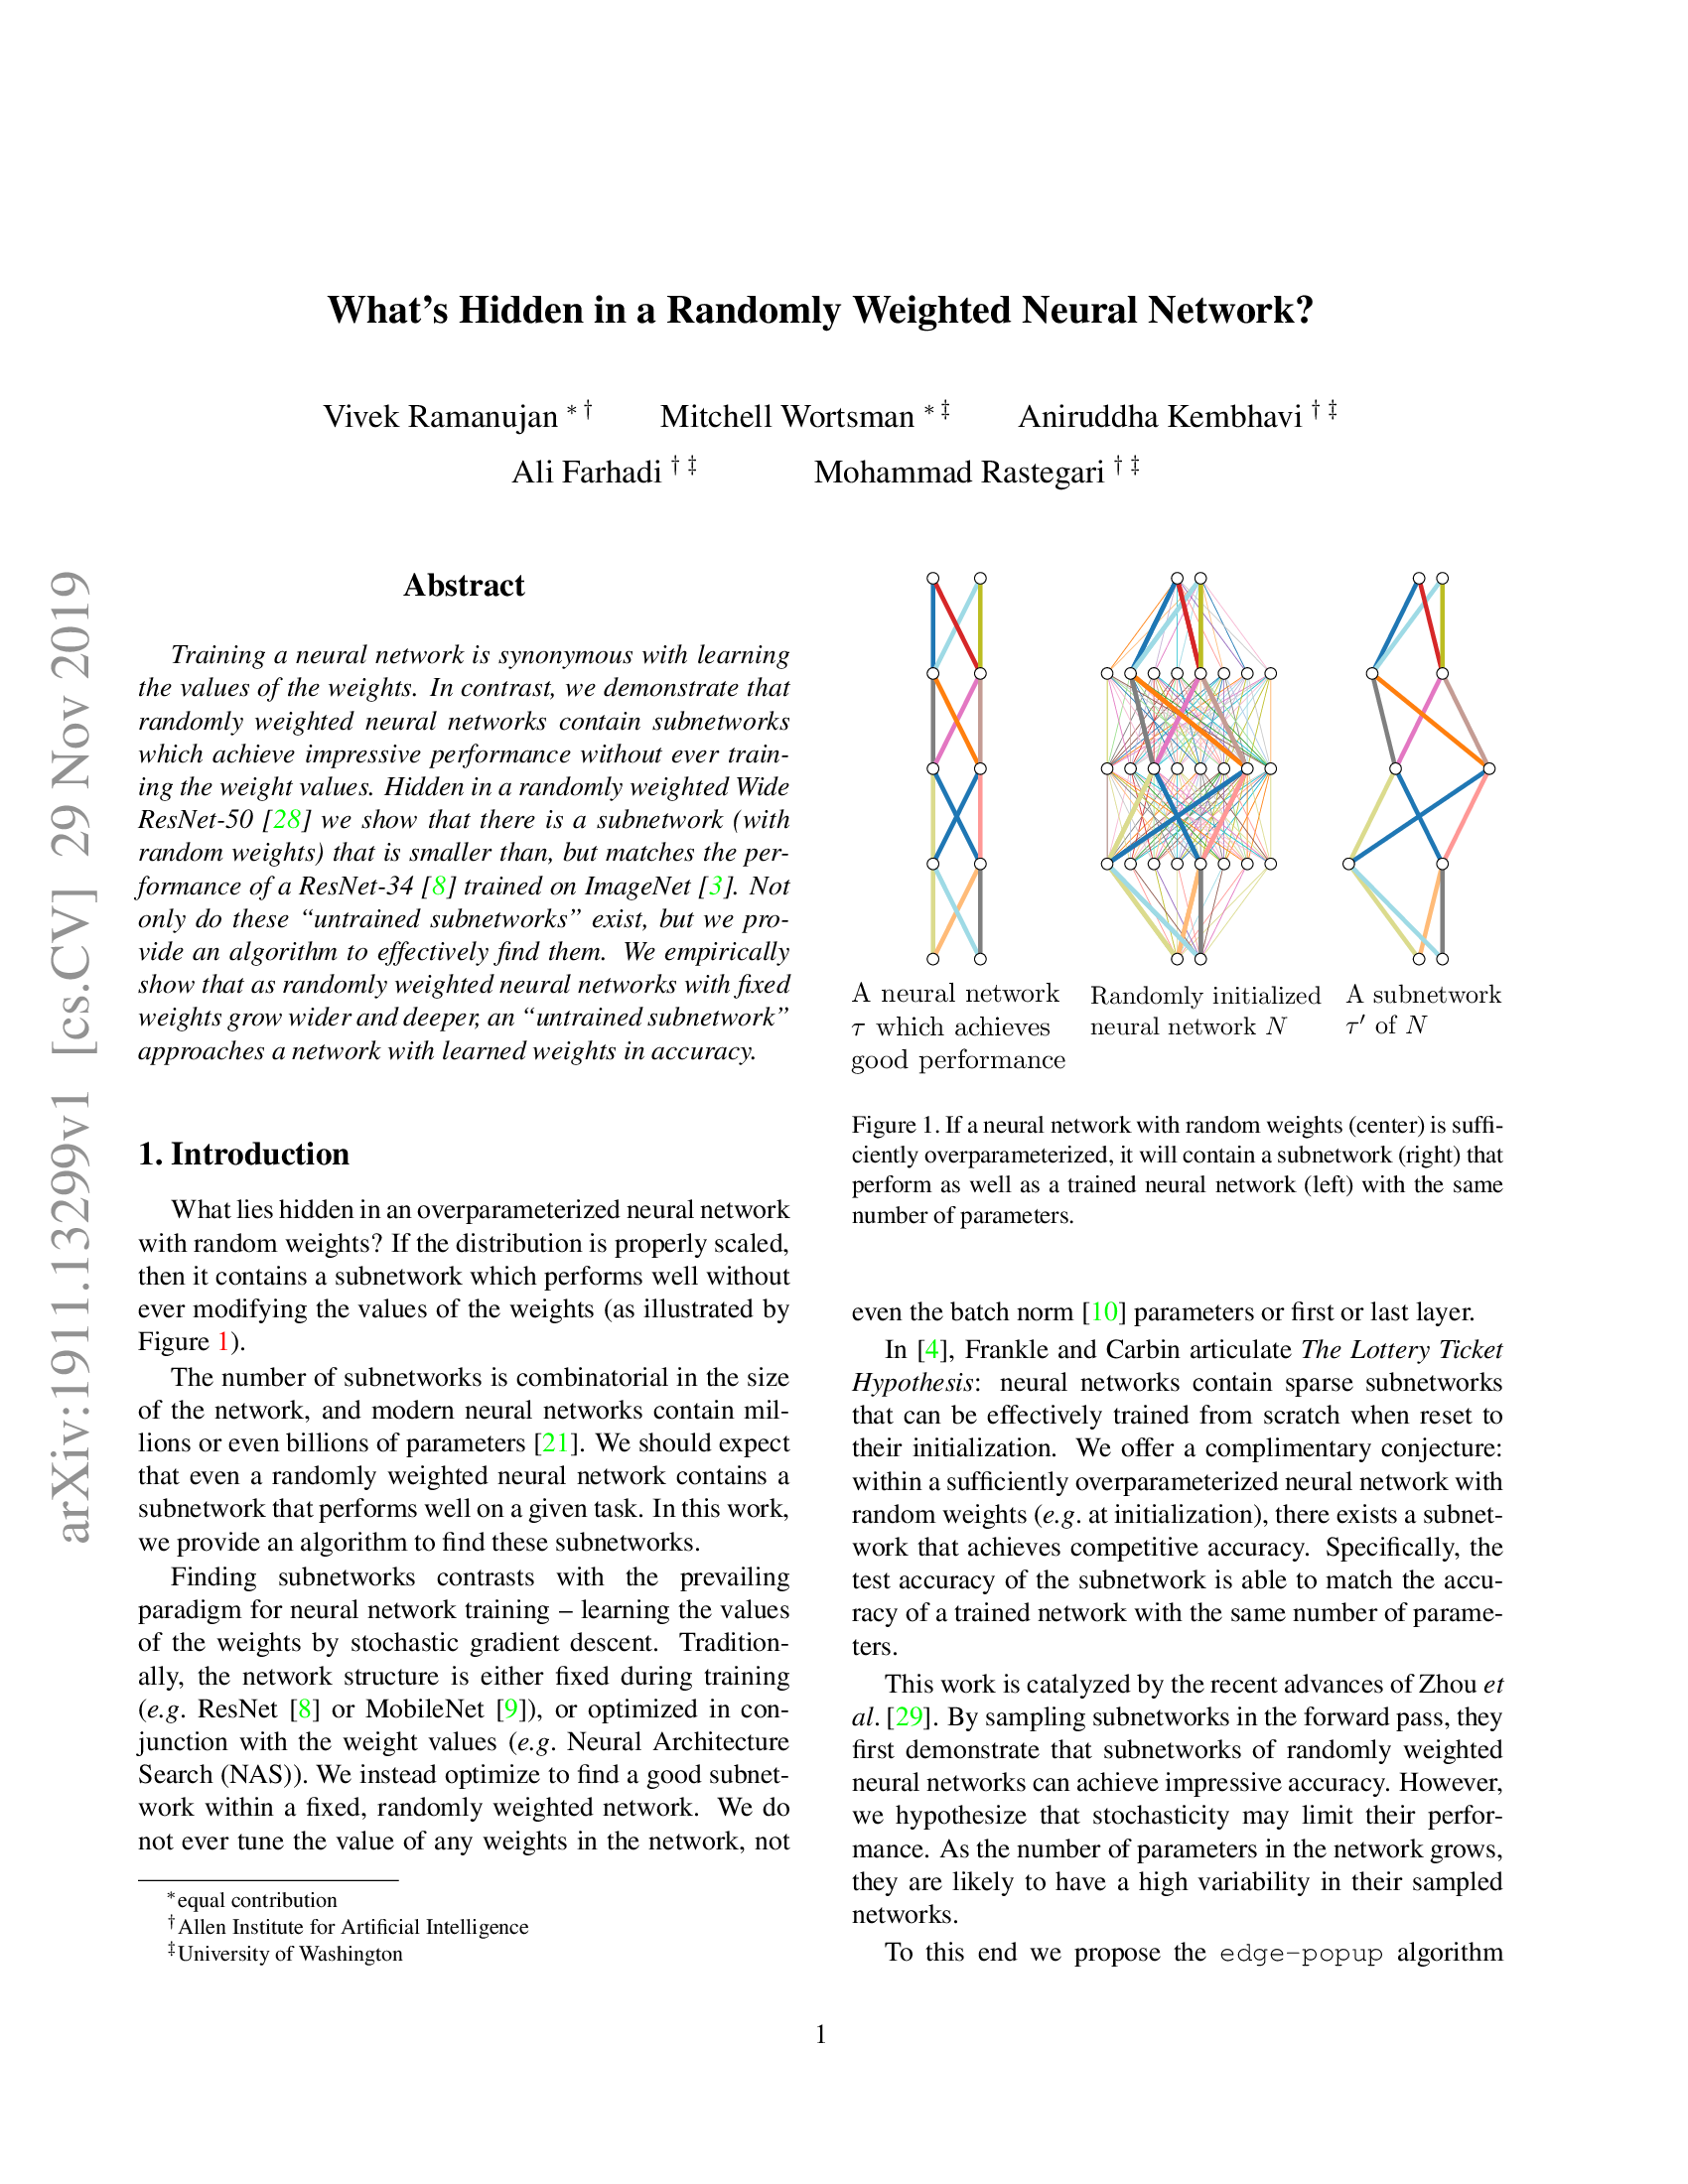 What’s Hidden in a Randomly Weighted Neural Network?